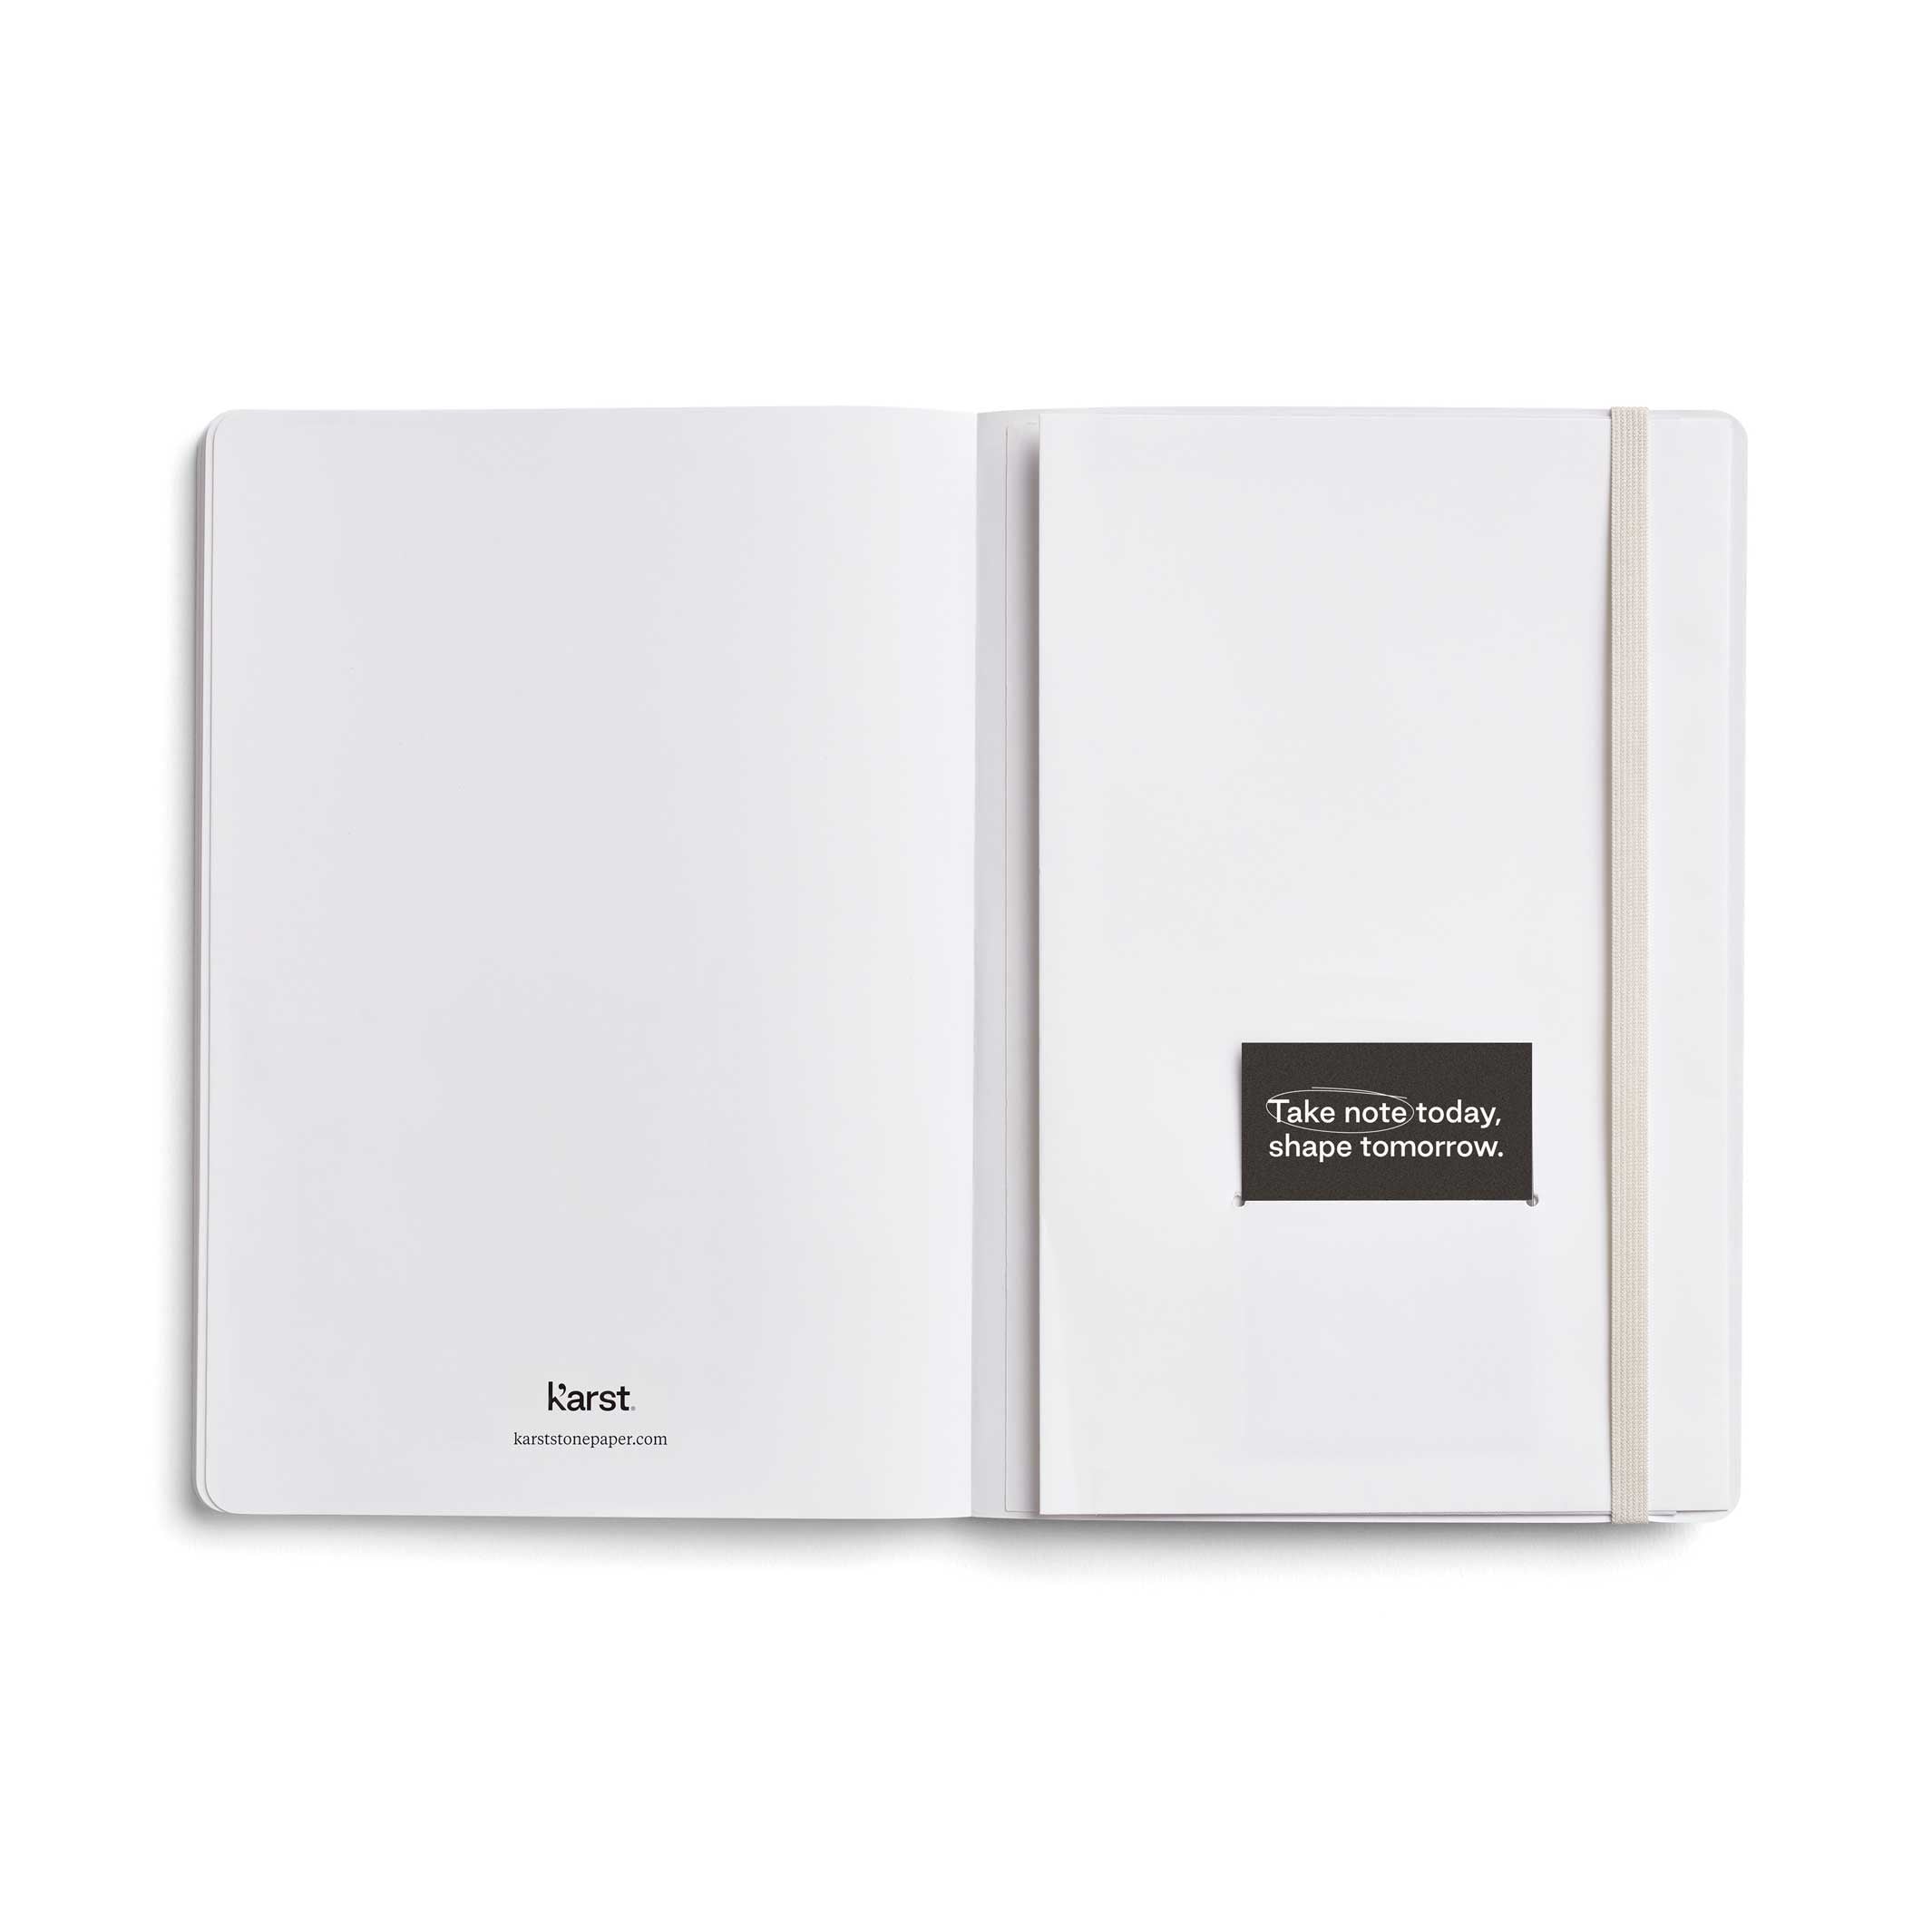 Softcover NOTEBOOK A5 | Navy-blaues NOTIZBUCH | Karst Stone Paper